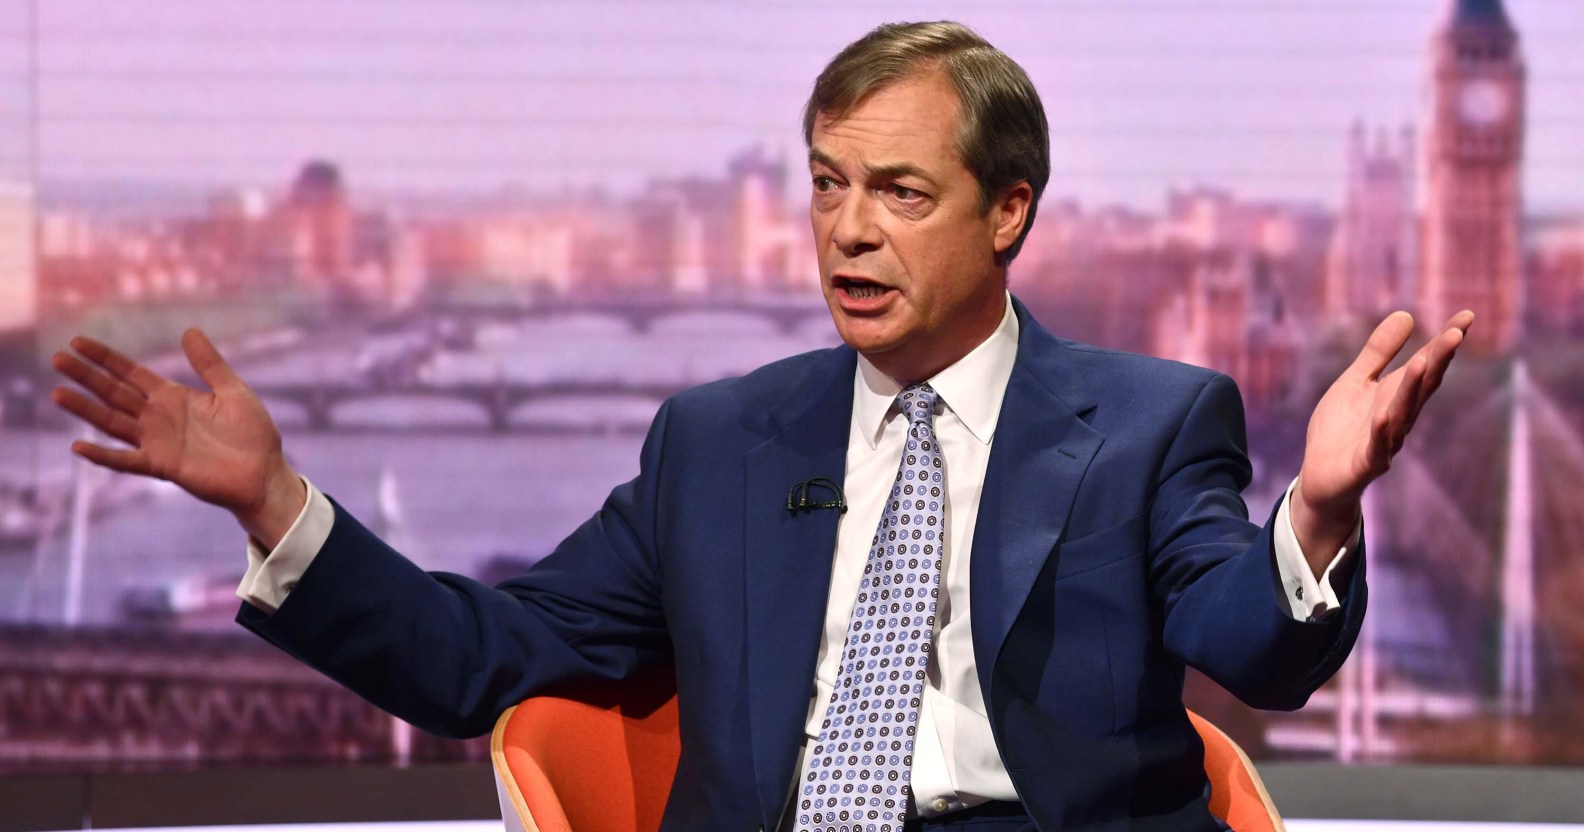 Leader of The Brexit Party Nigel Farage appears on The Andrew Marr Show on May 11, 2019 in London, England.